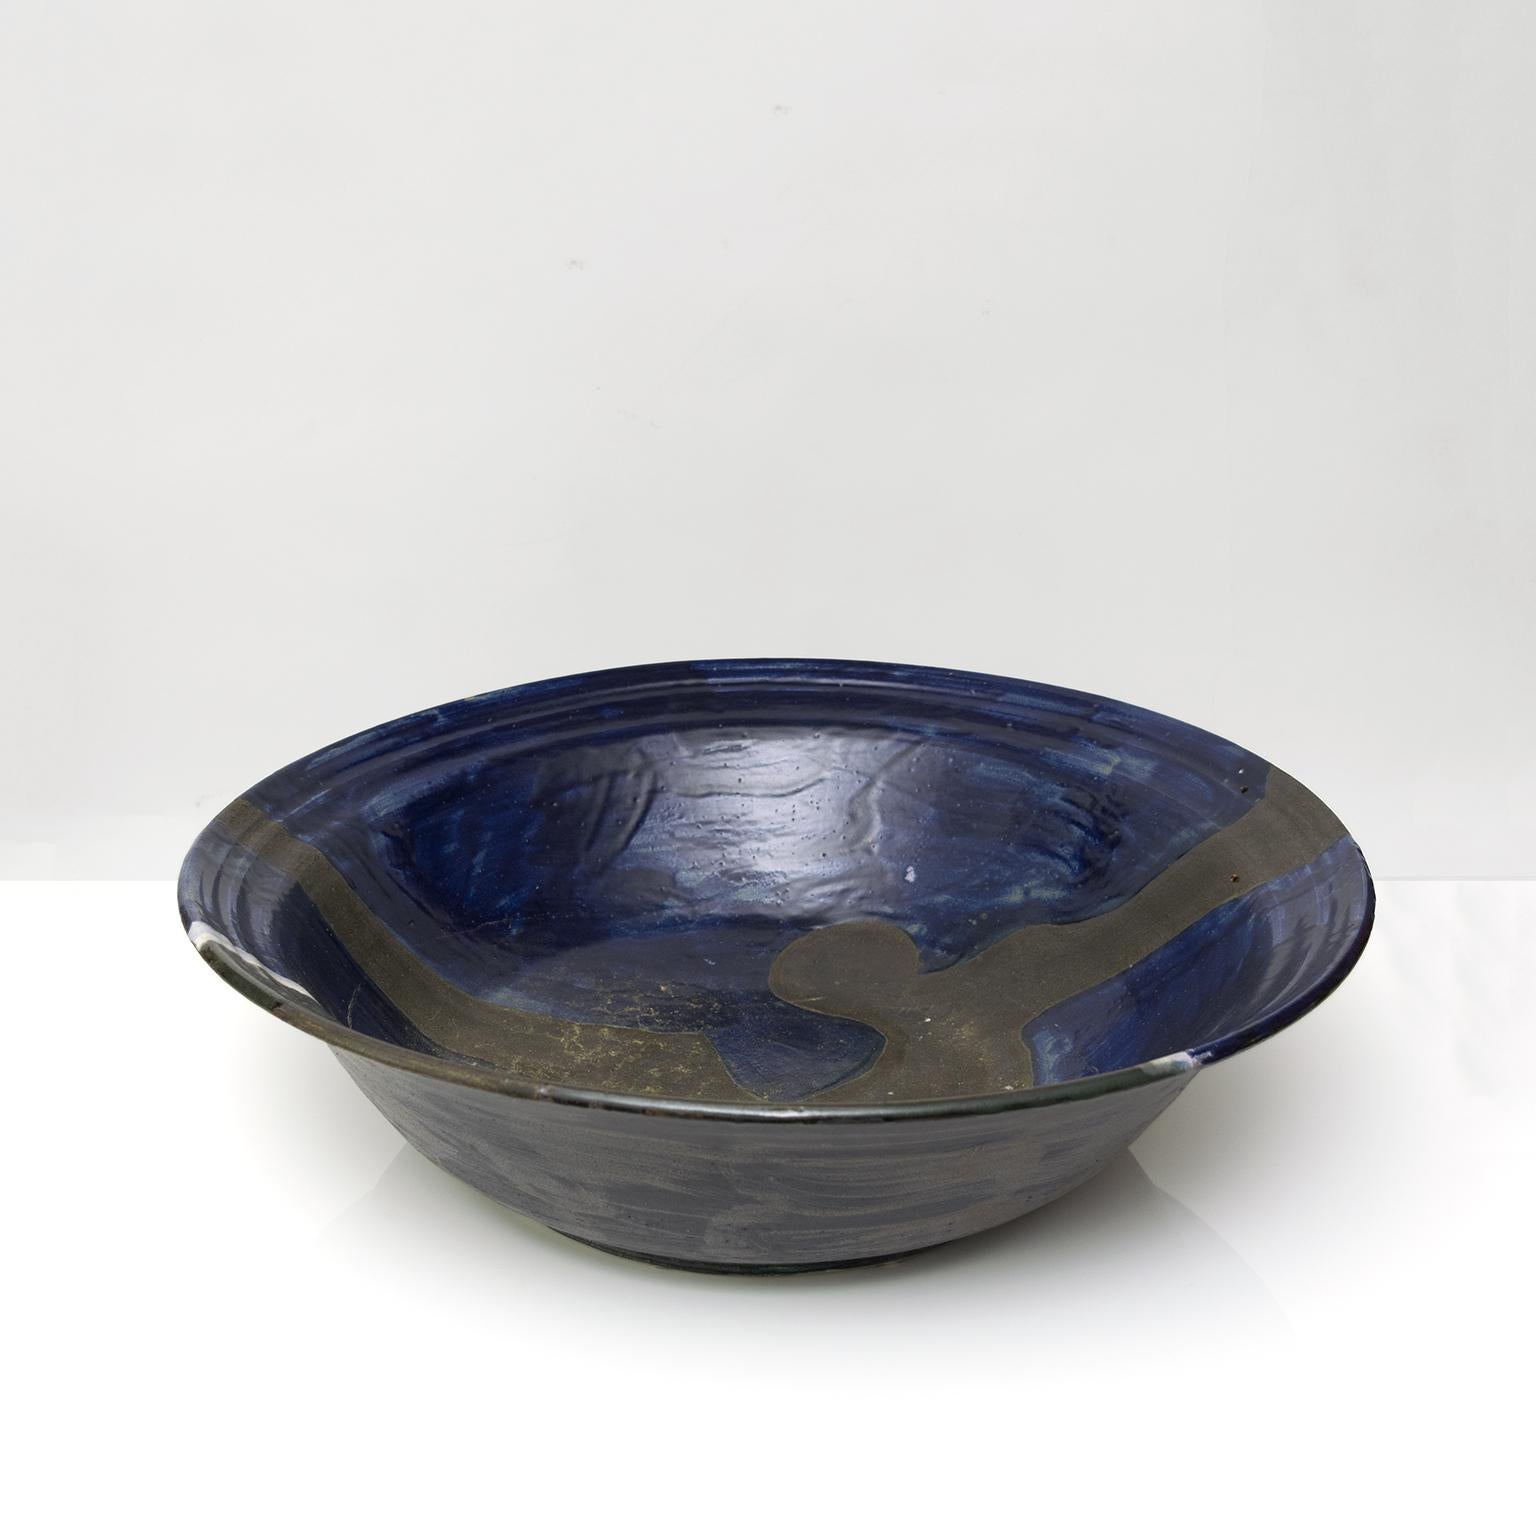 A monumental unique Scandinavian Modern ceramic bowl by British born ceramicist Carl Cunningham-Cole who worked in Scandinavia for 30 years. This piece is hand thrown and glazed in deep blue, white and gray. 

Measures: Height 7